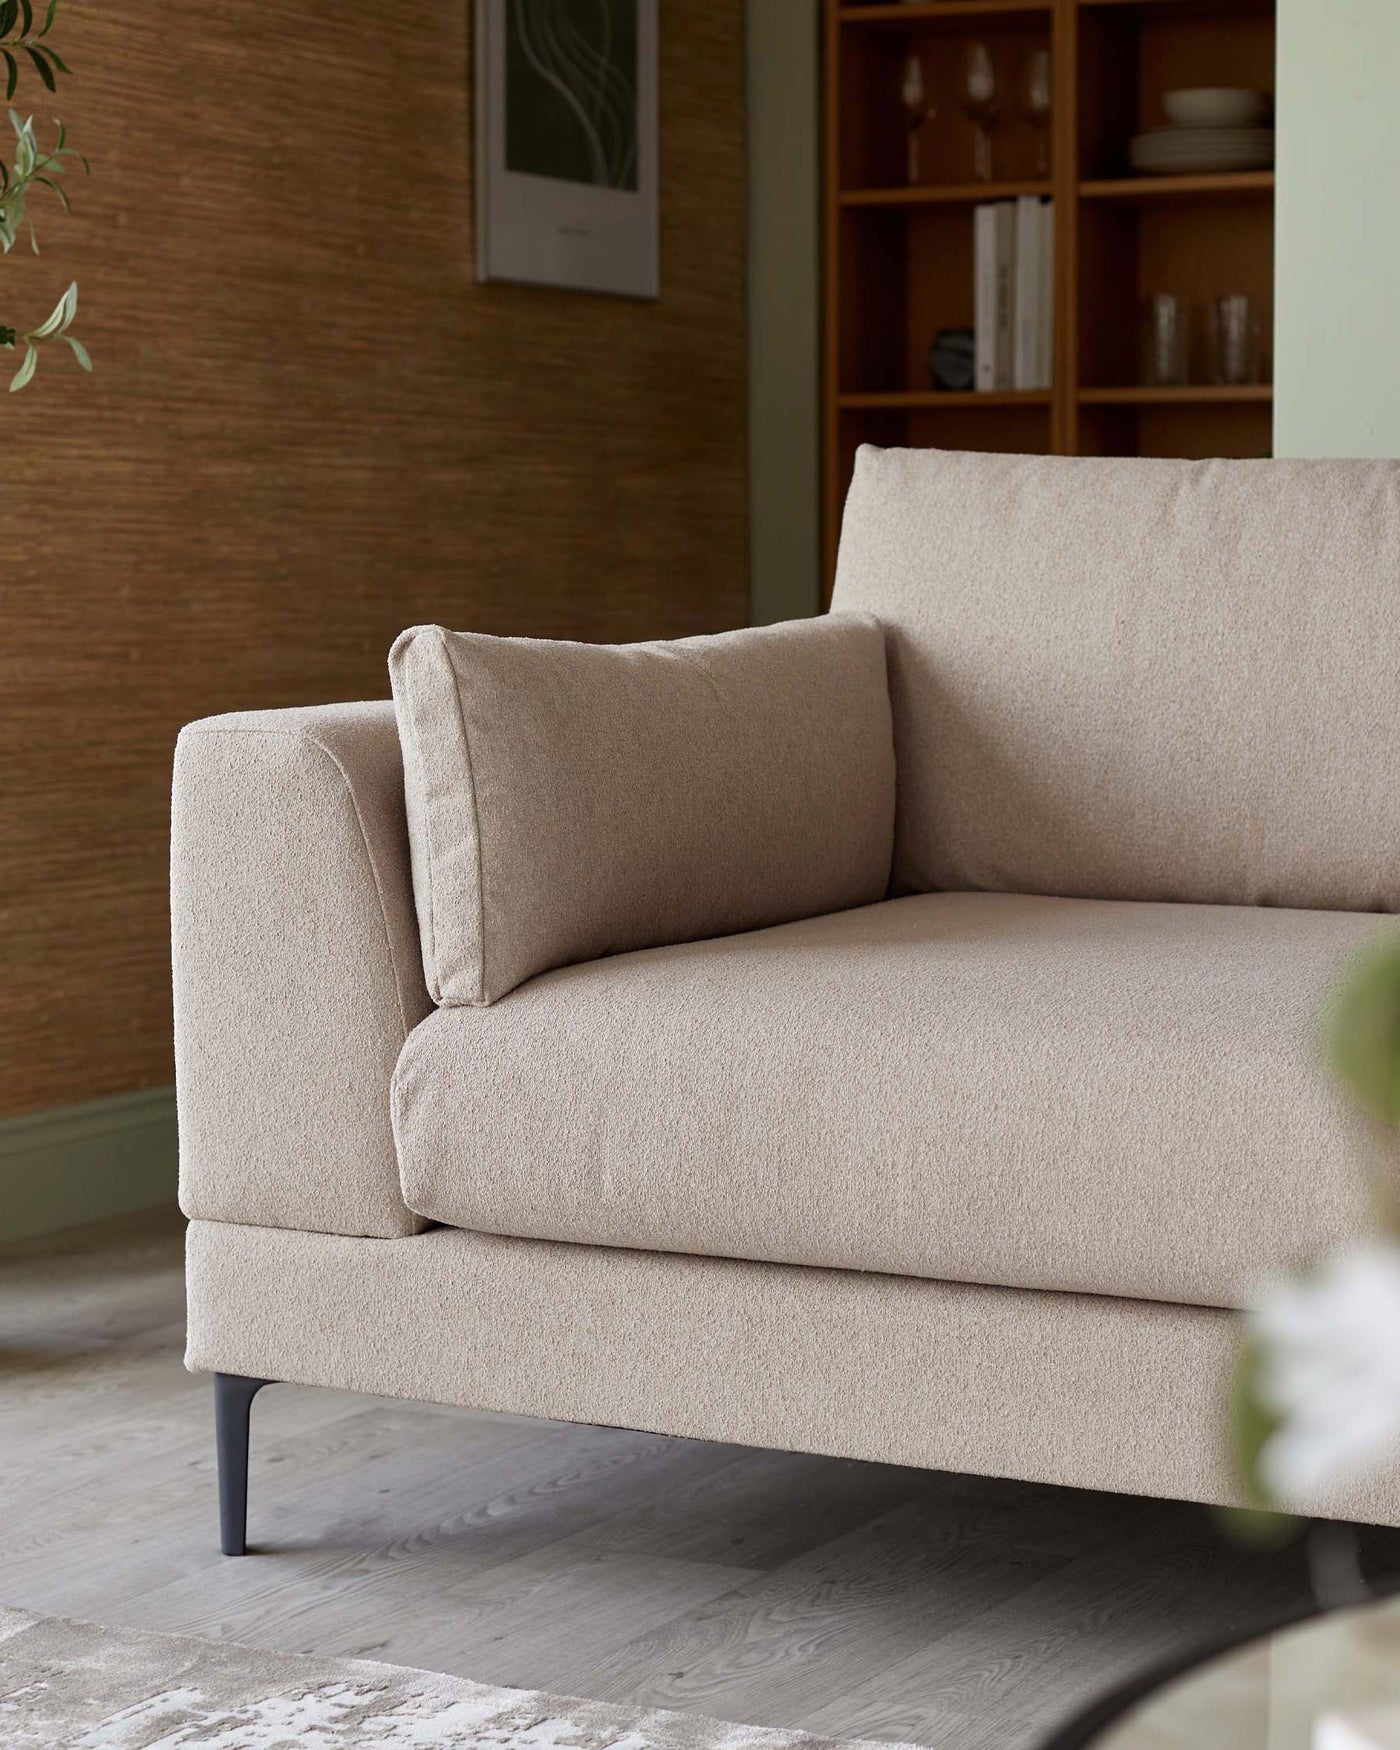 Modern beige fabric sofa with a minimalist design, featuring a straight-lined silhouette, clean armrests, and dark tapered legs. A single matching cushion complements the sofa's streamlined look. The background showcases a wooden bookshelf filled with items and a framed artwork above, set against a textured brown wall.